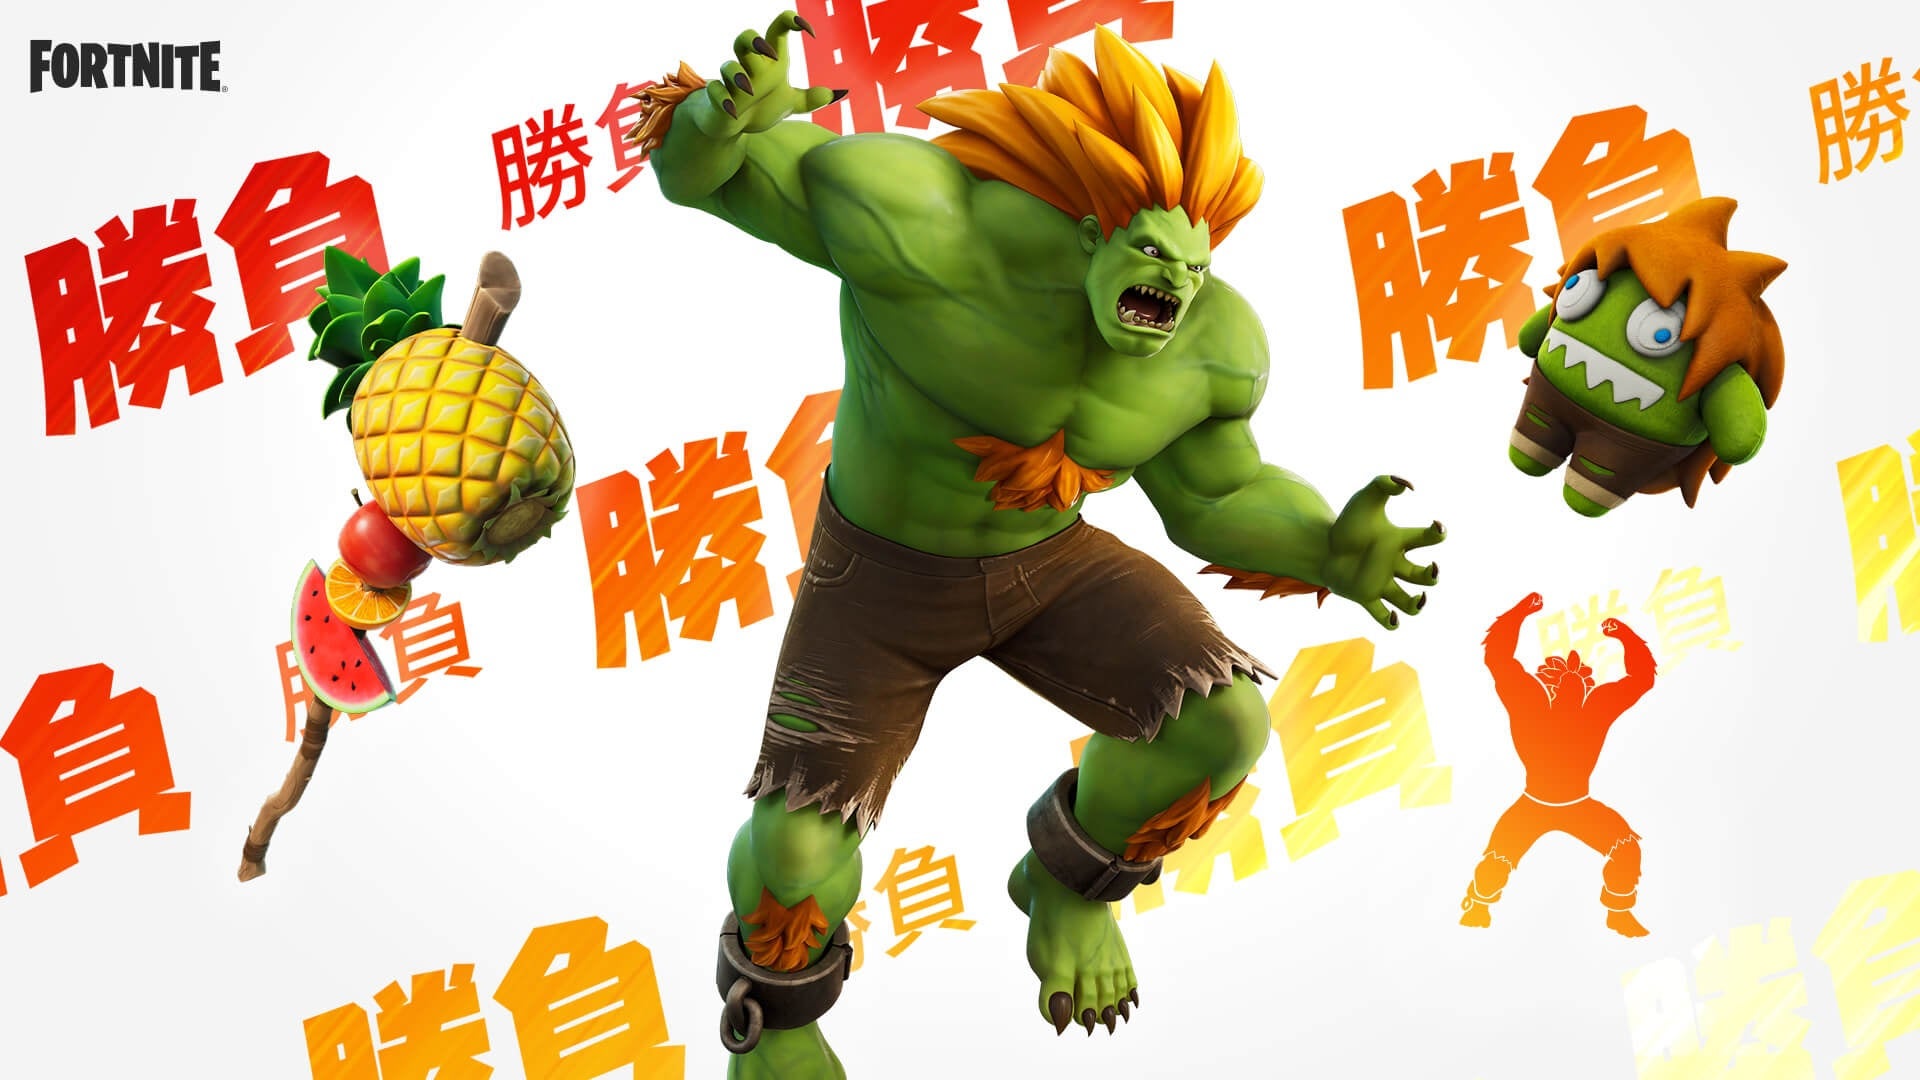 Blanka from Street Fighter, alongside their Fortnite cosmetics coming to the game.